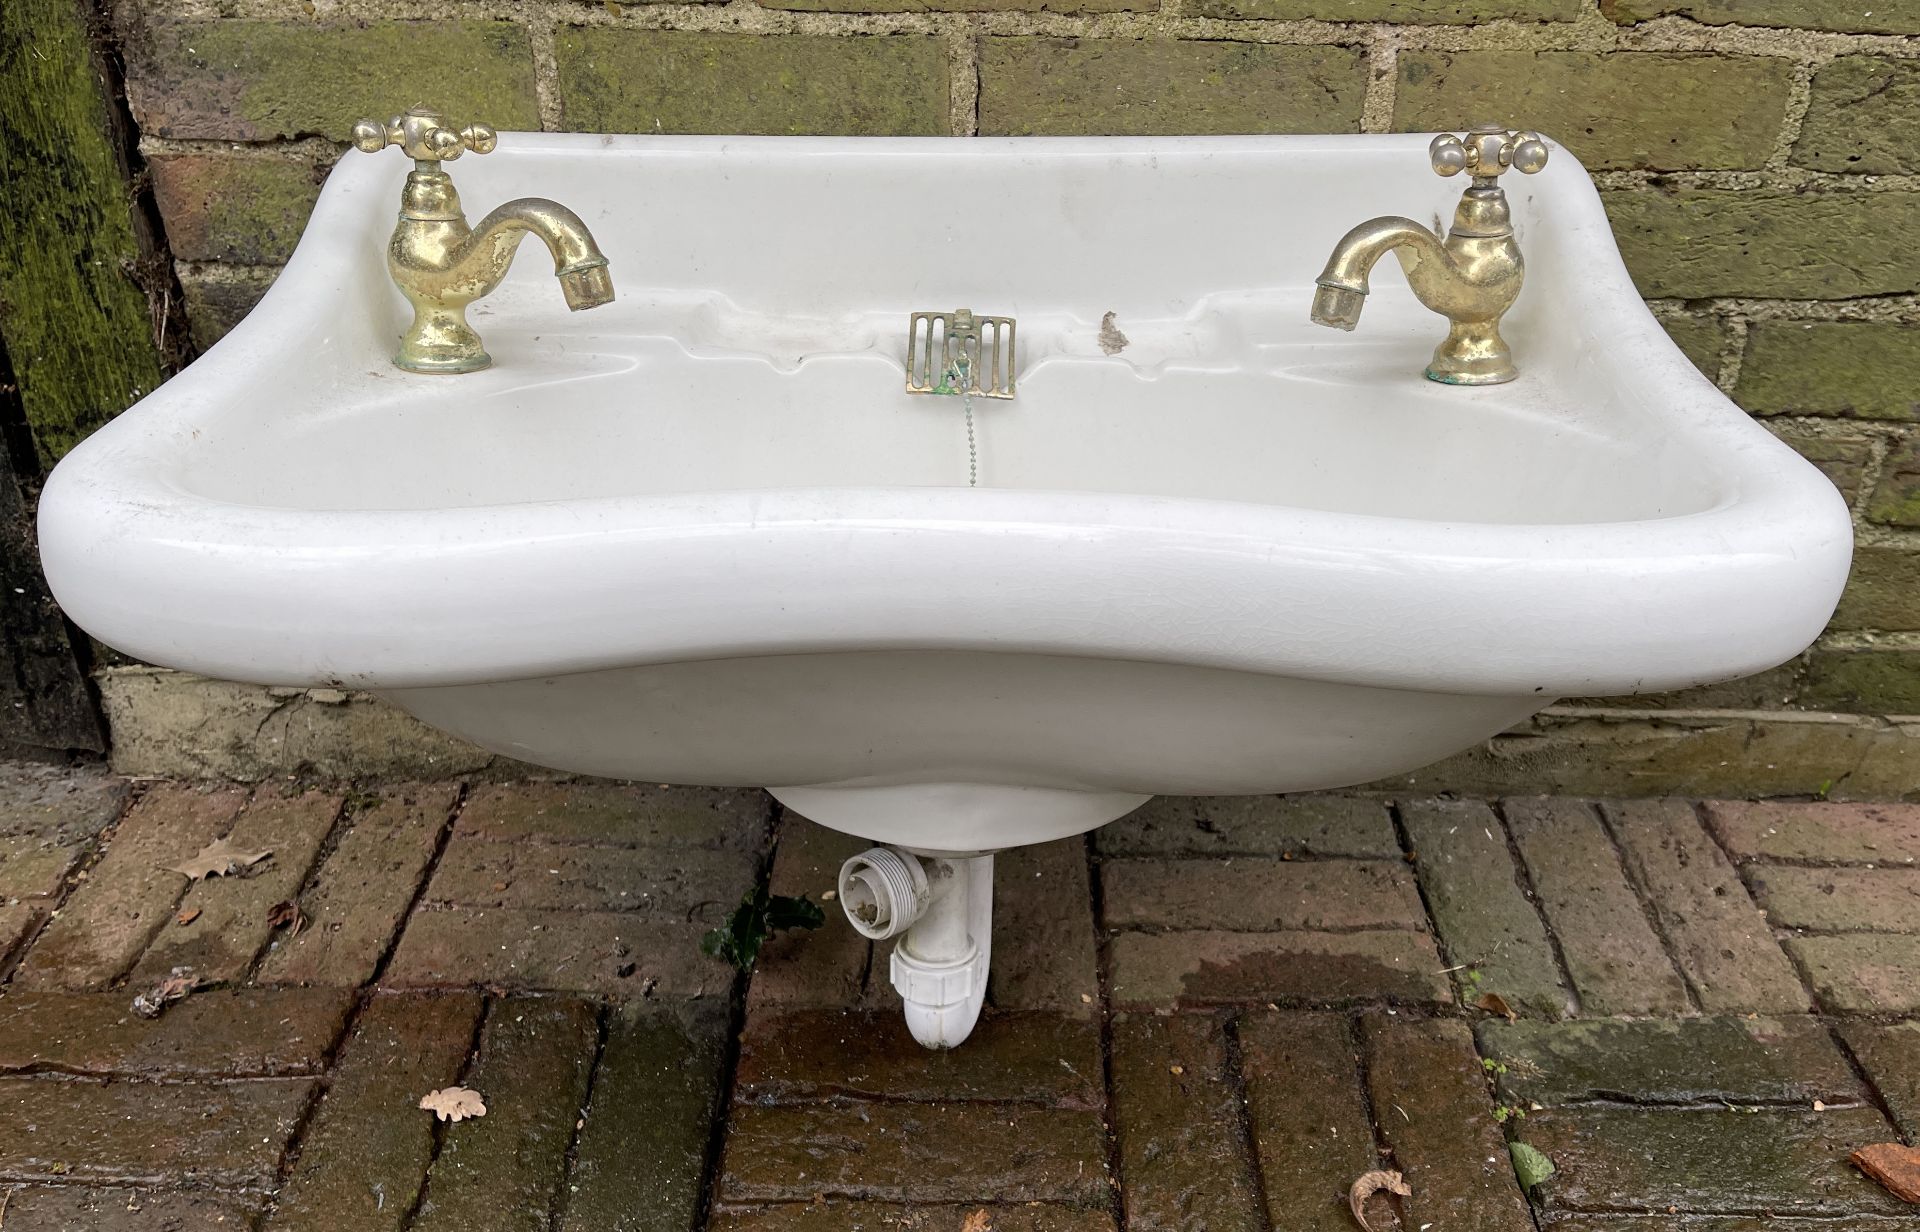 LARGE ANTIQUE PRISTINE SINK WITH ORIGINAL HARDWARE WITH BASE STAND